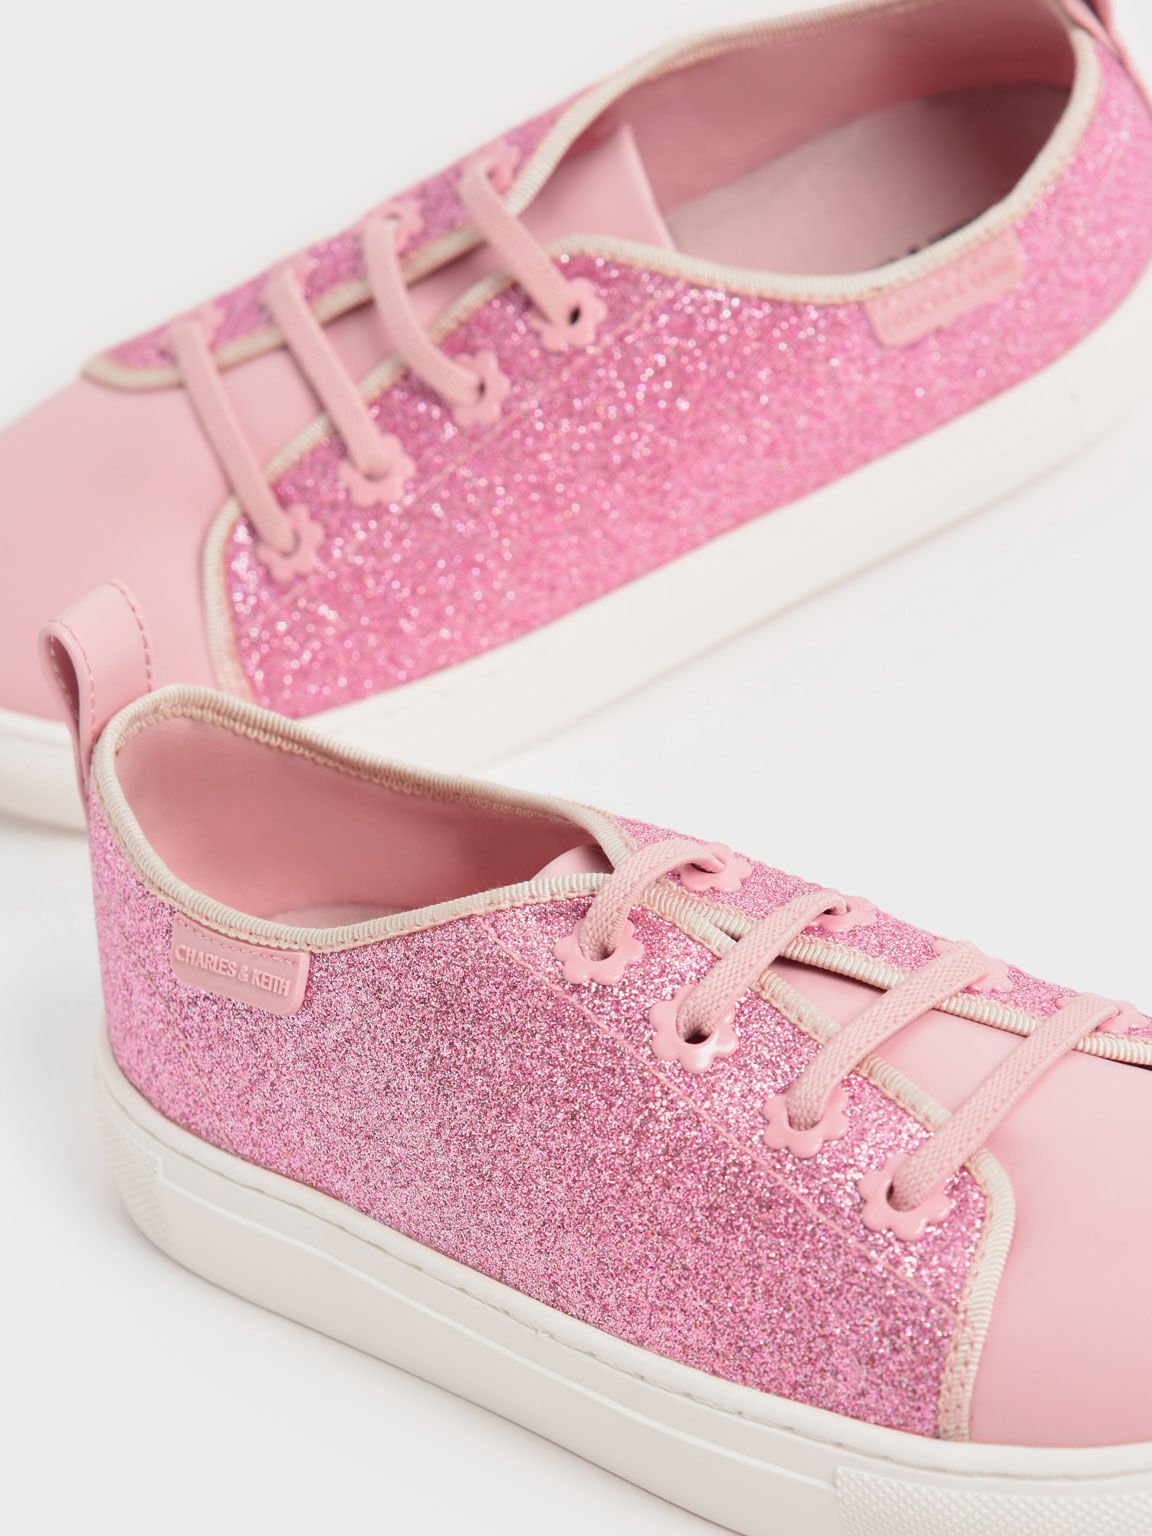 Girls' Glittered Sneakers, Pink, hi-res